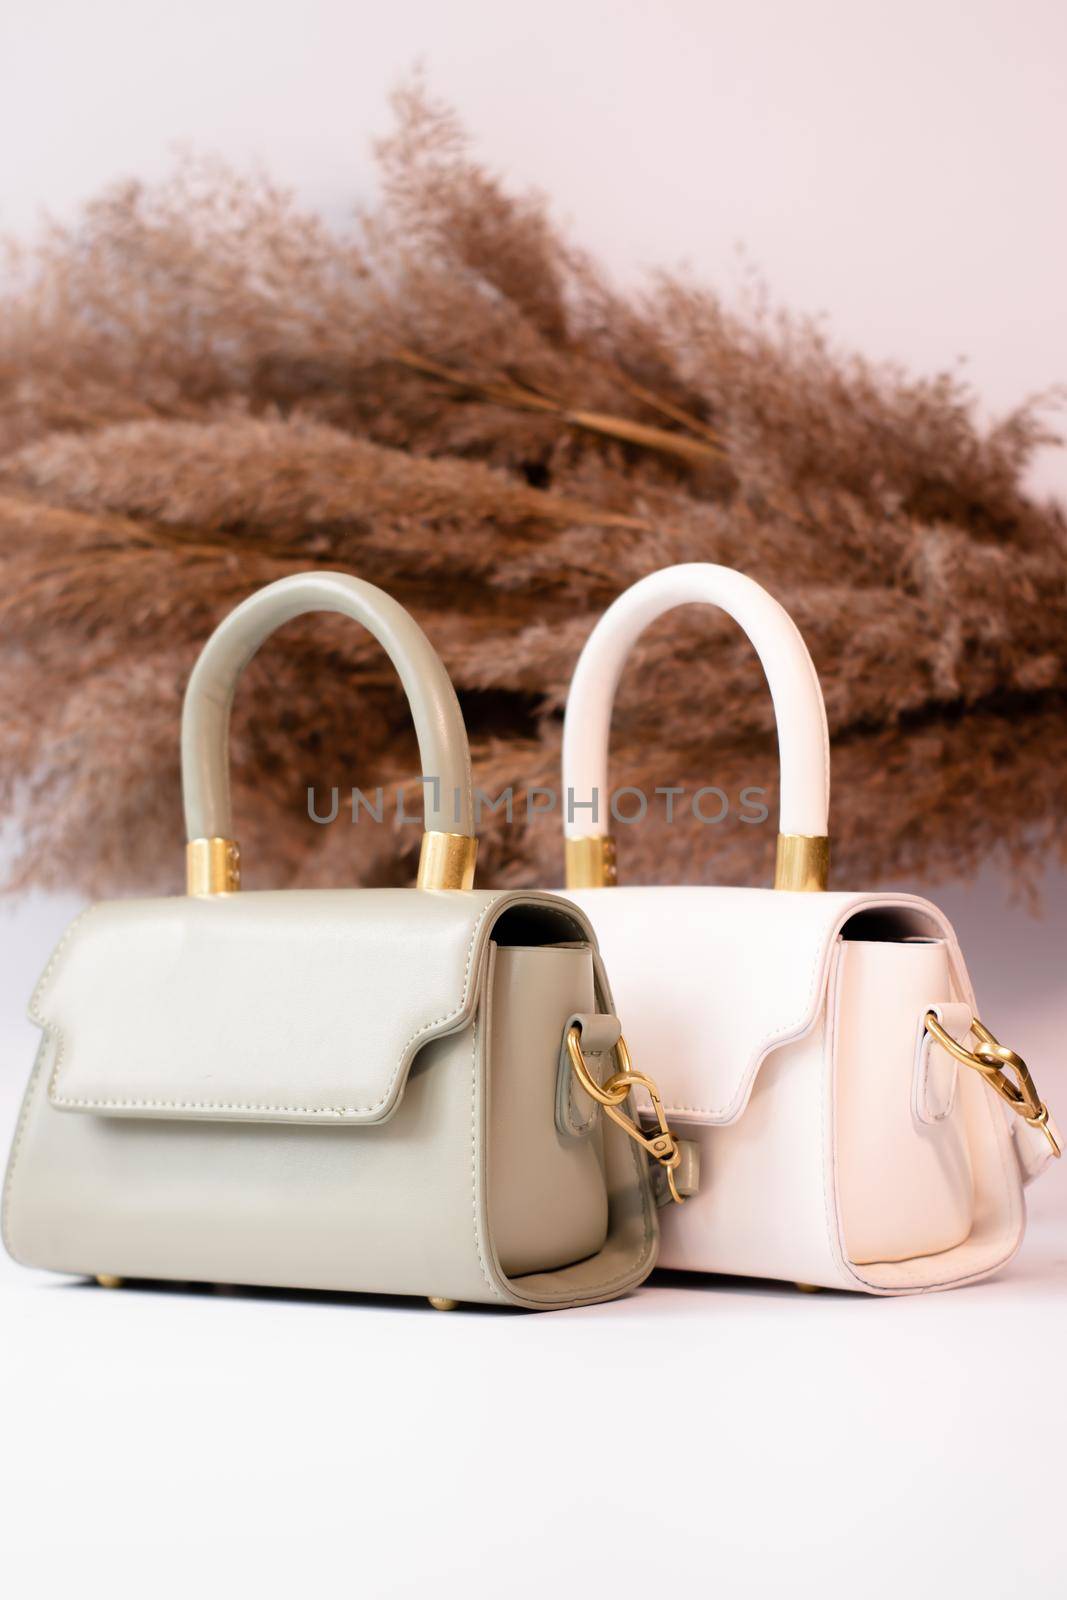 fashion photo of two purse. beige and green woman handbag with gold chain on background of pampas grass or dried flowers. isolated on white background. Product composition photography.